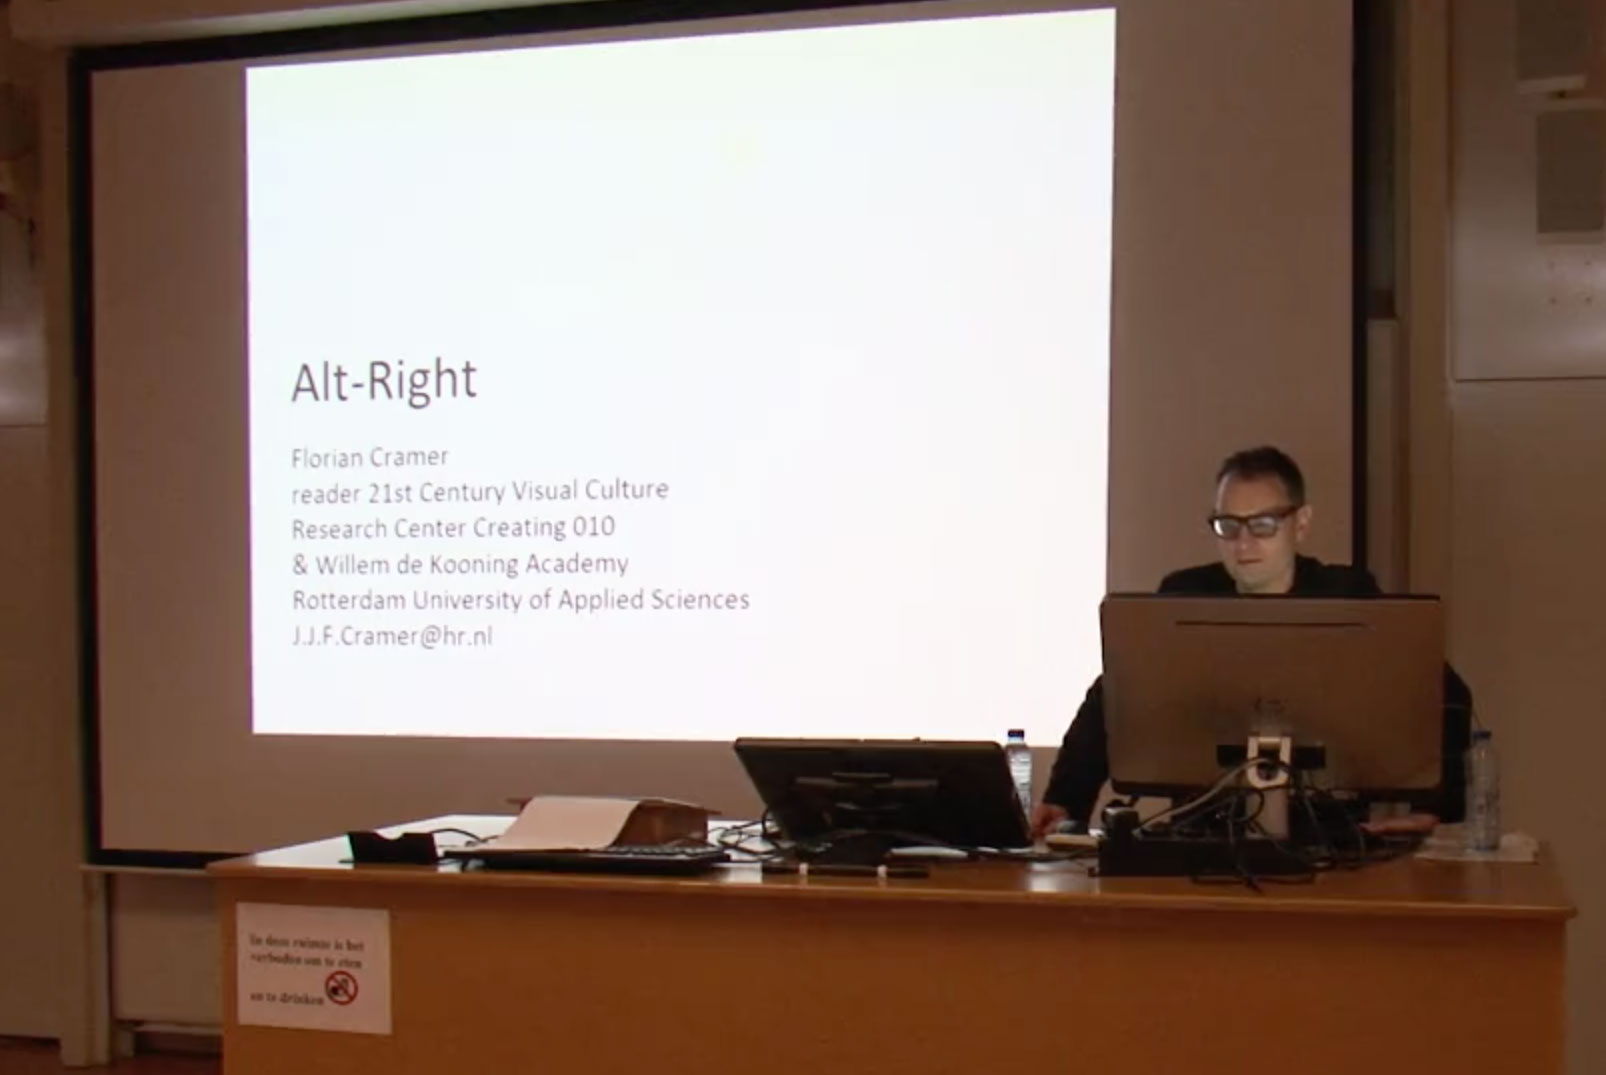 Alt-Right, A Lecture by Florian Cramer: Screening